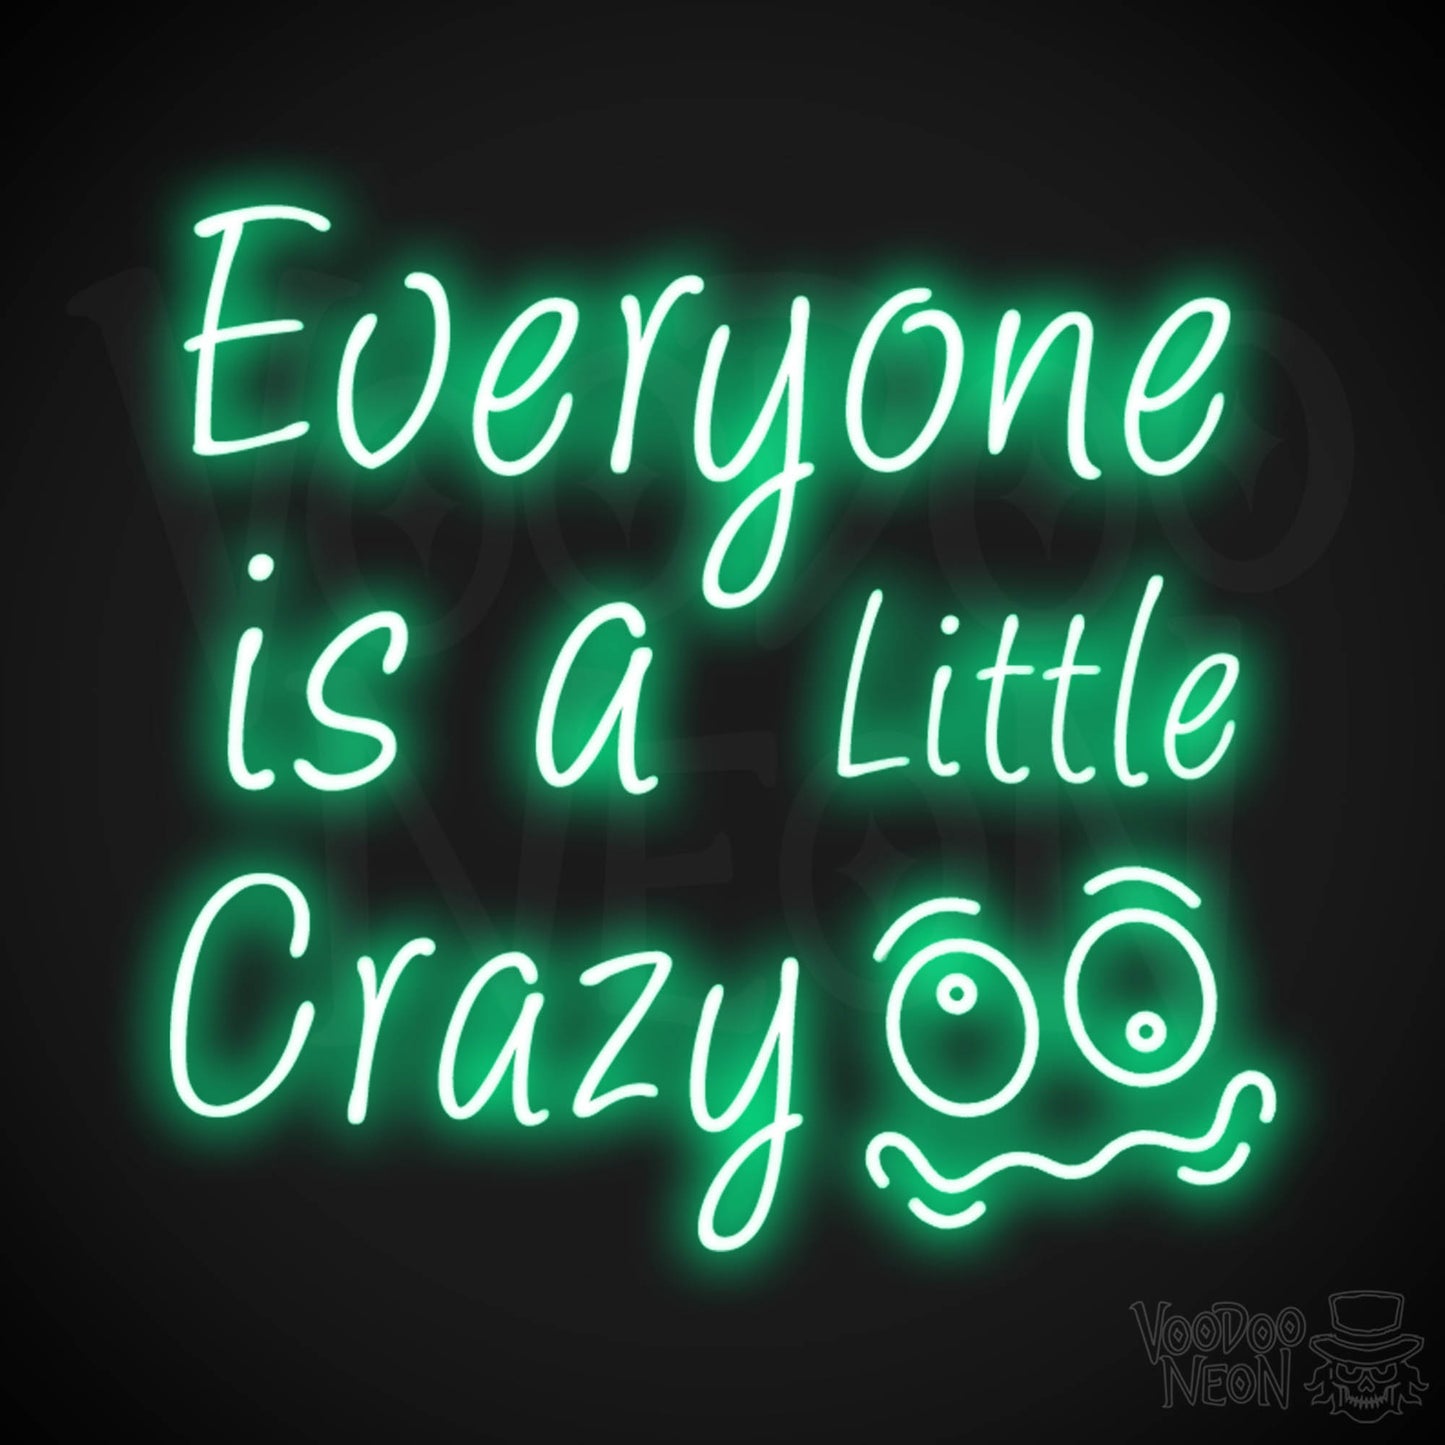 Everyone Is A Little Crazy Neon Sign - Neon Everyone Is A Little Crazy Sign - Color Green